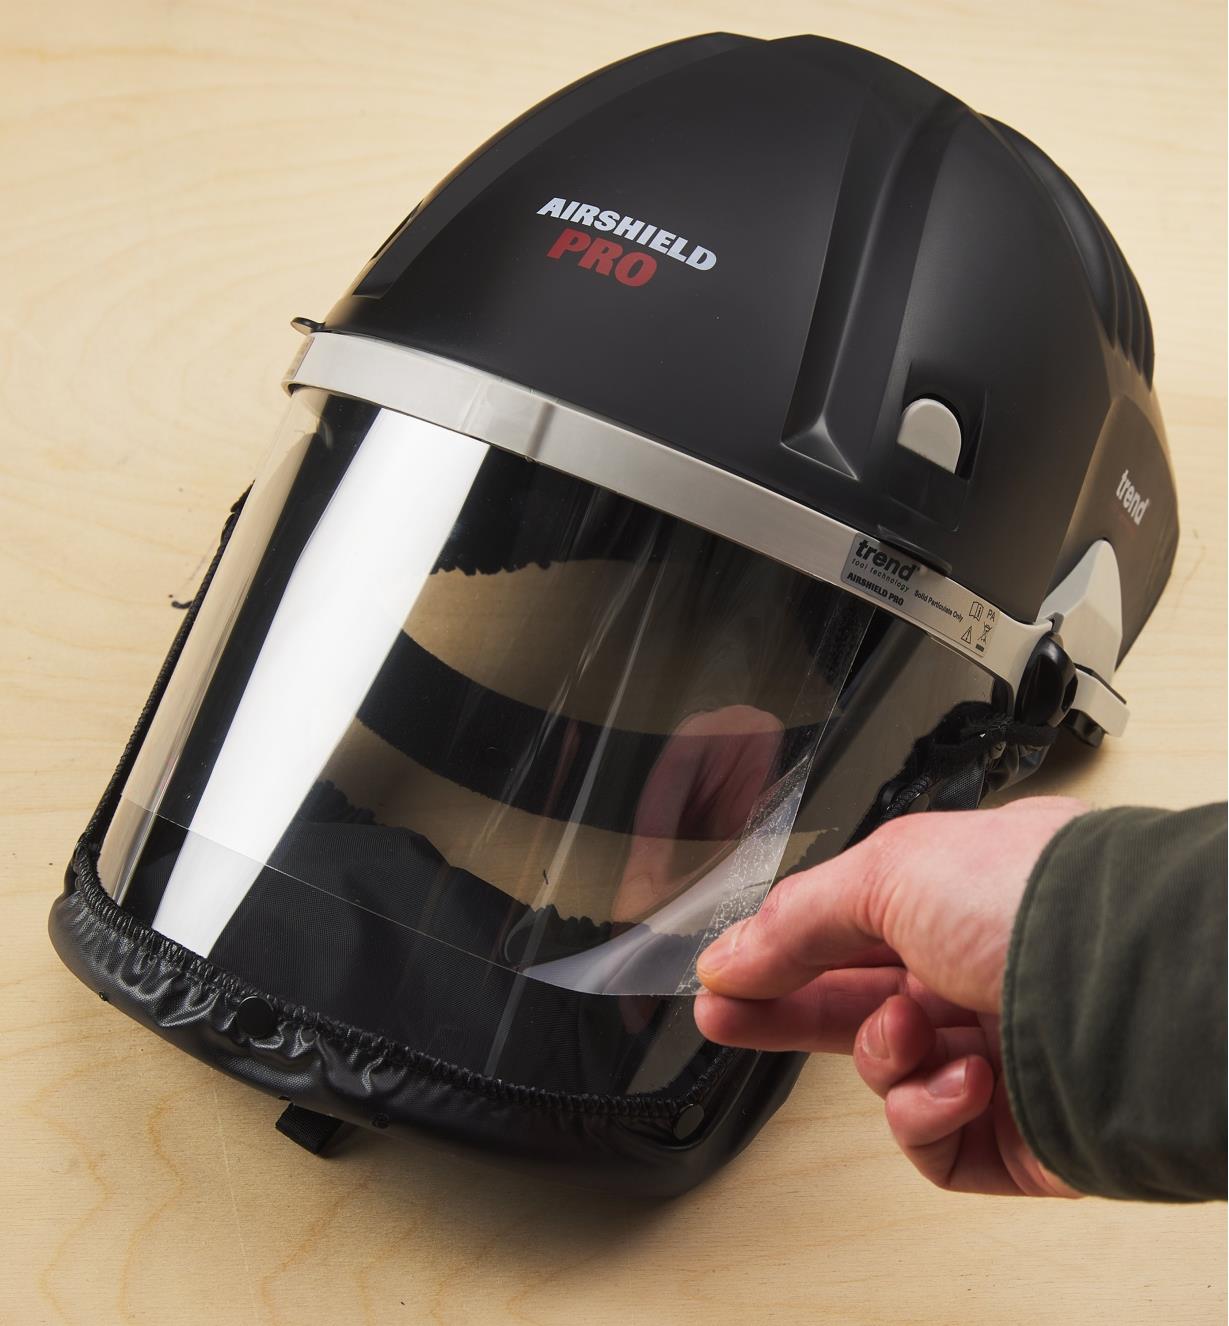 Removing a peel-and-stick film overlay from a visor